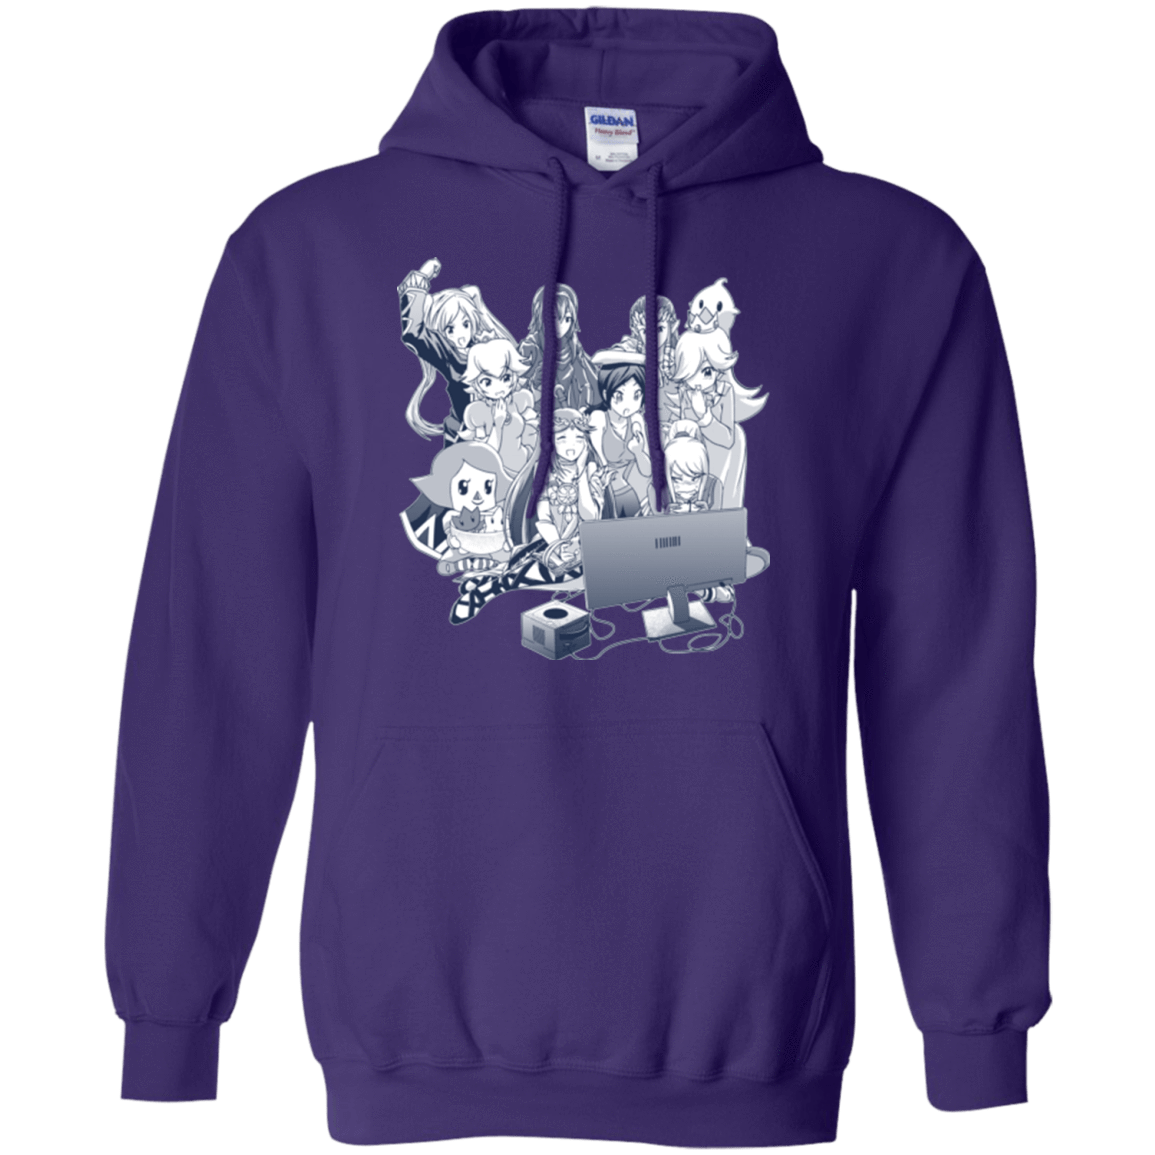 Sweatshirts Purple / Small Girls Night Out Pullover Hoodie